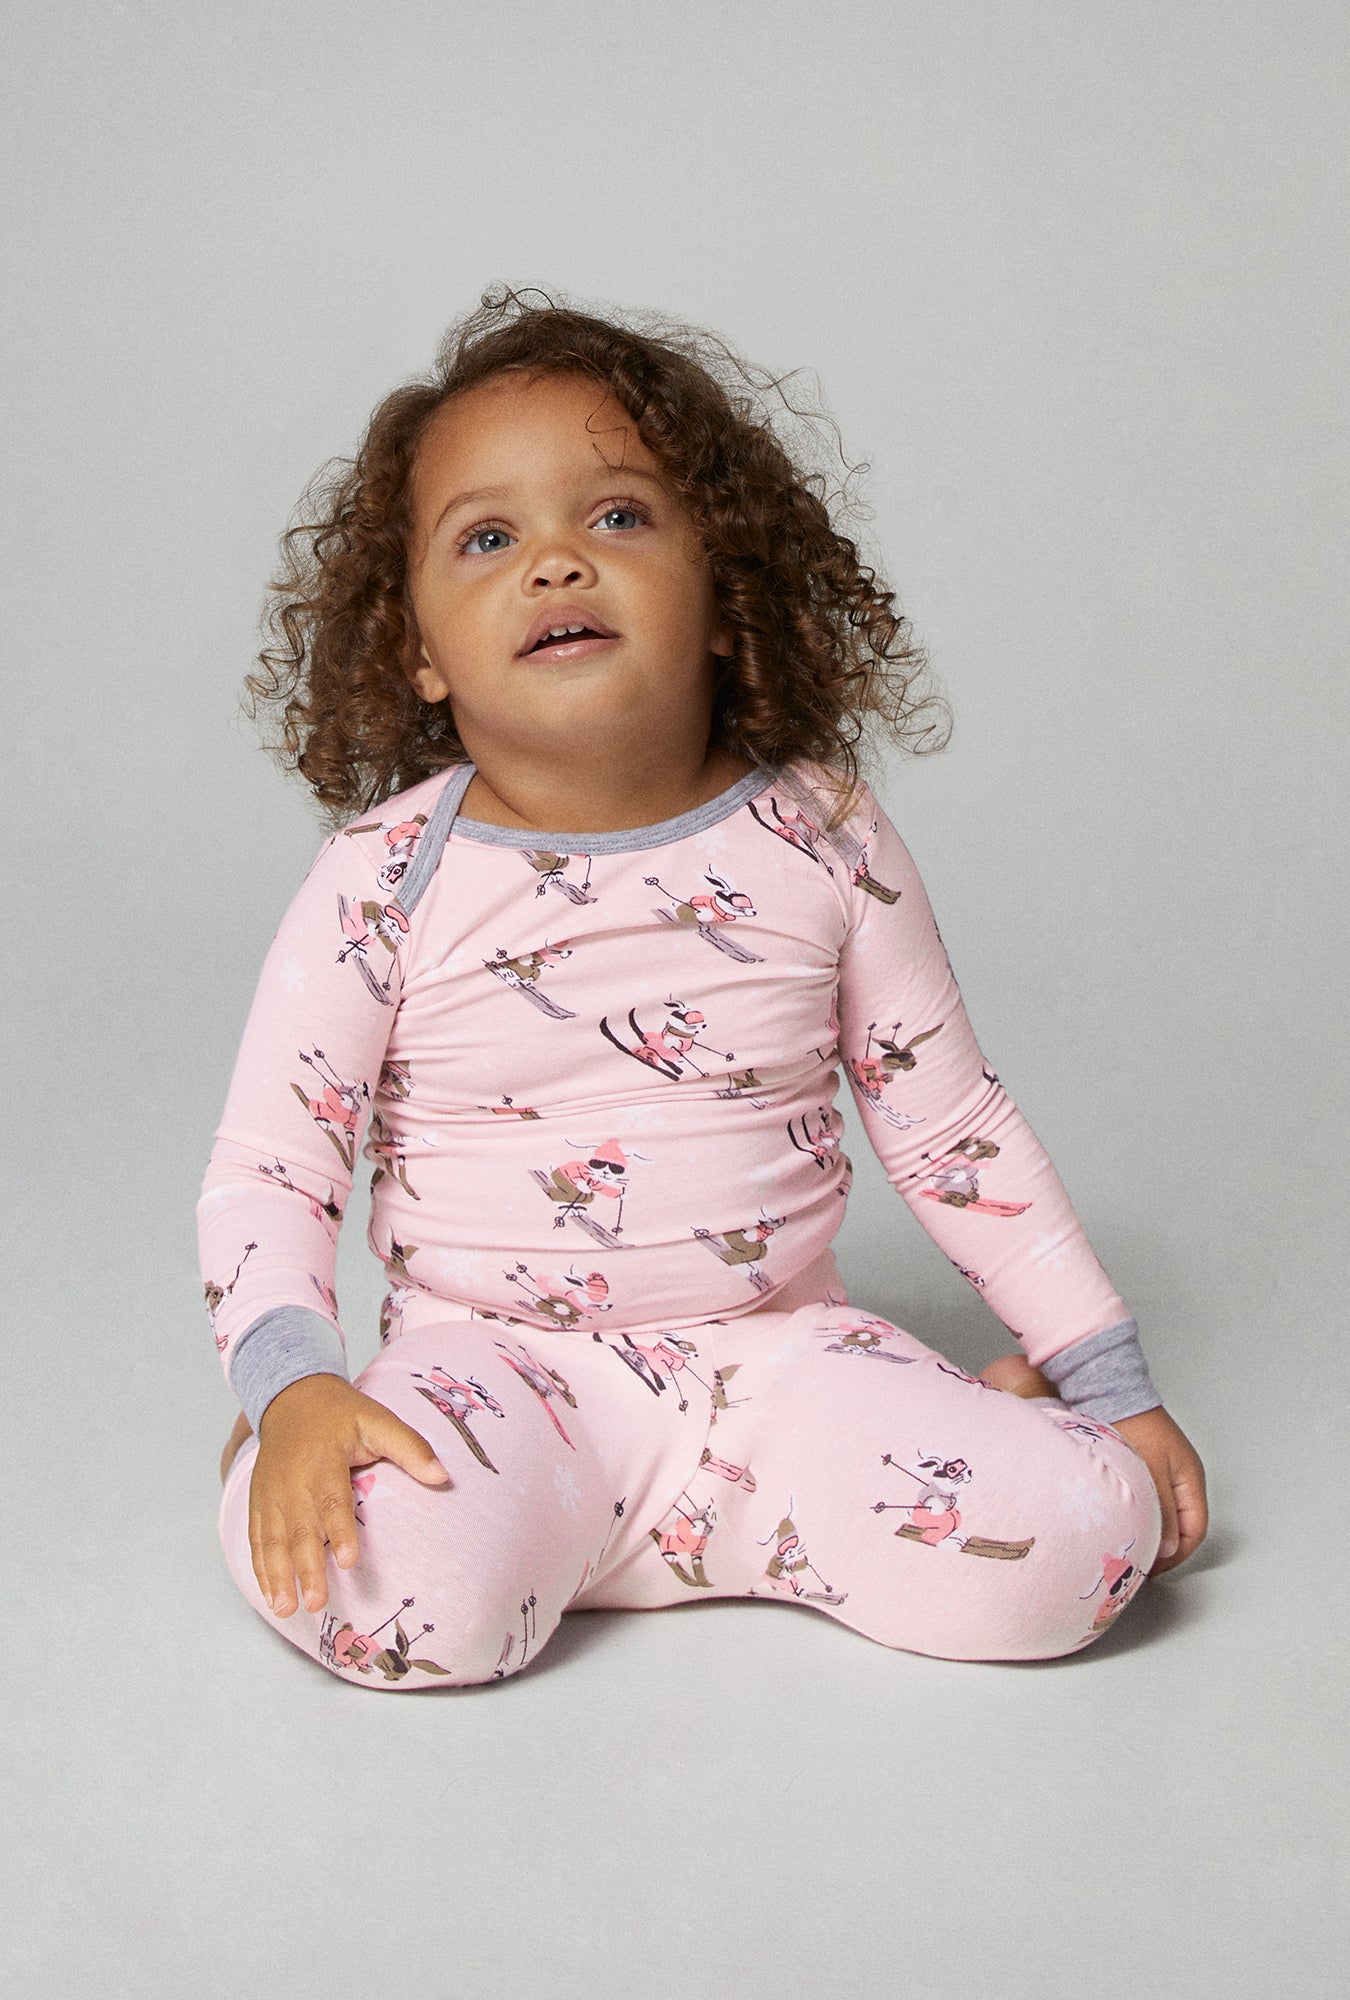 A baby wearing pink long sleeve stretch jersey boo boo pj set with ski bunnies print.